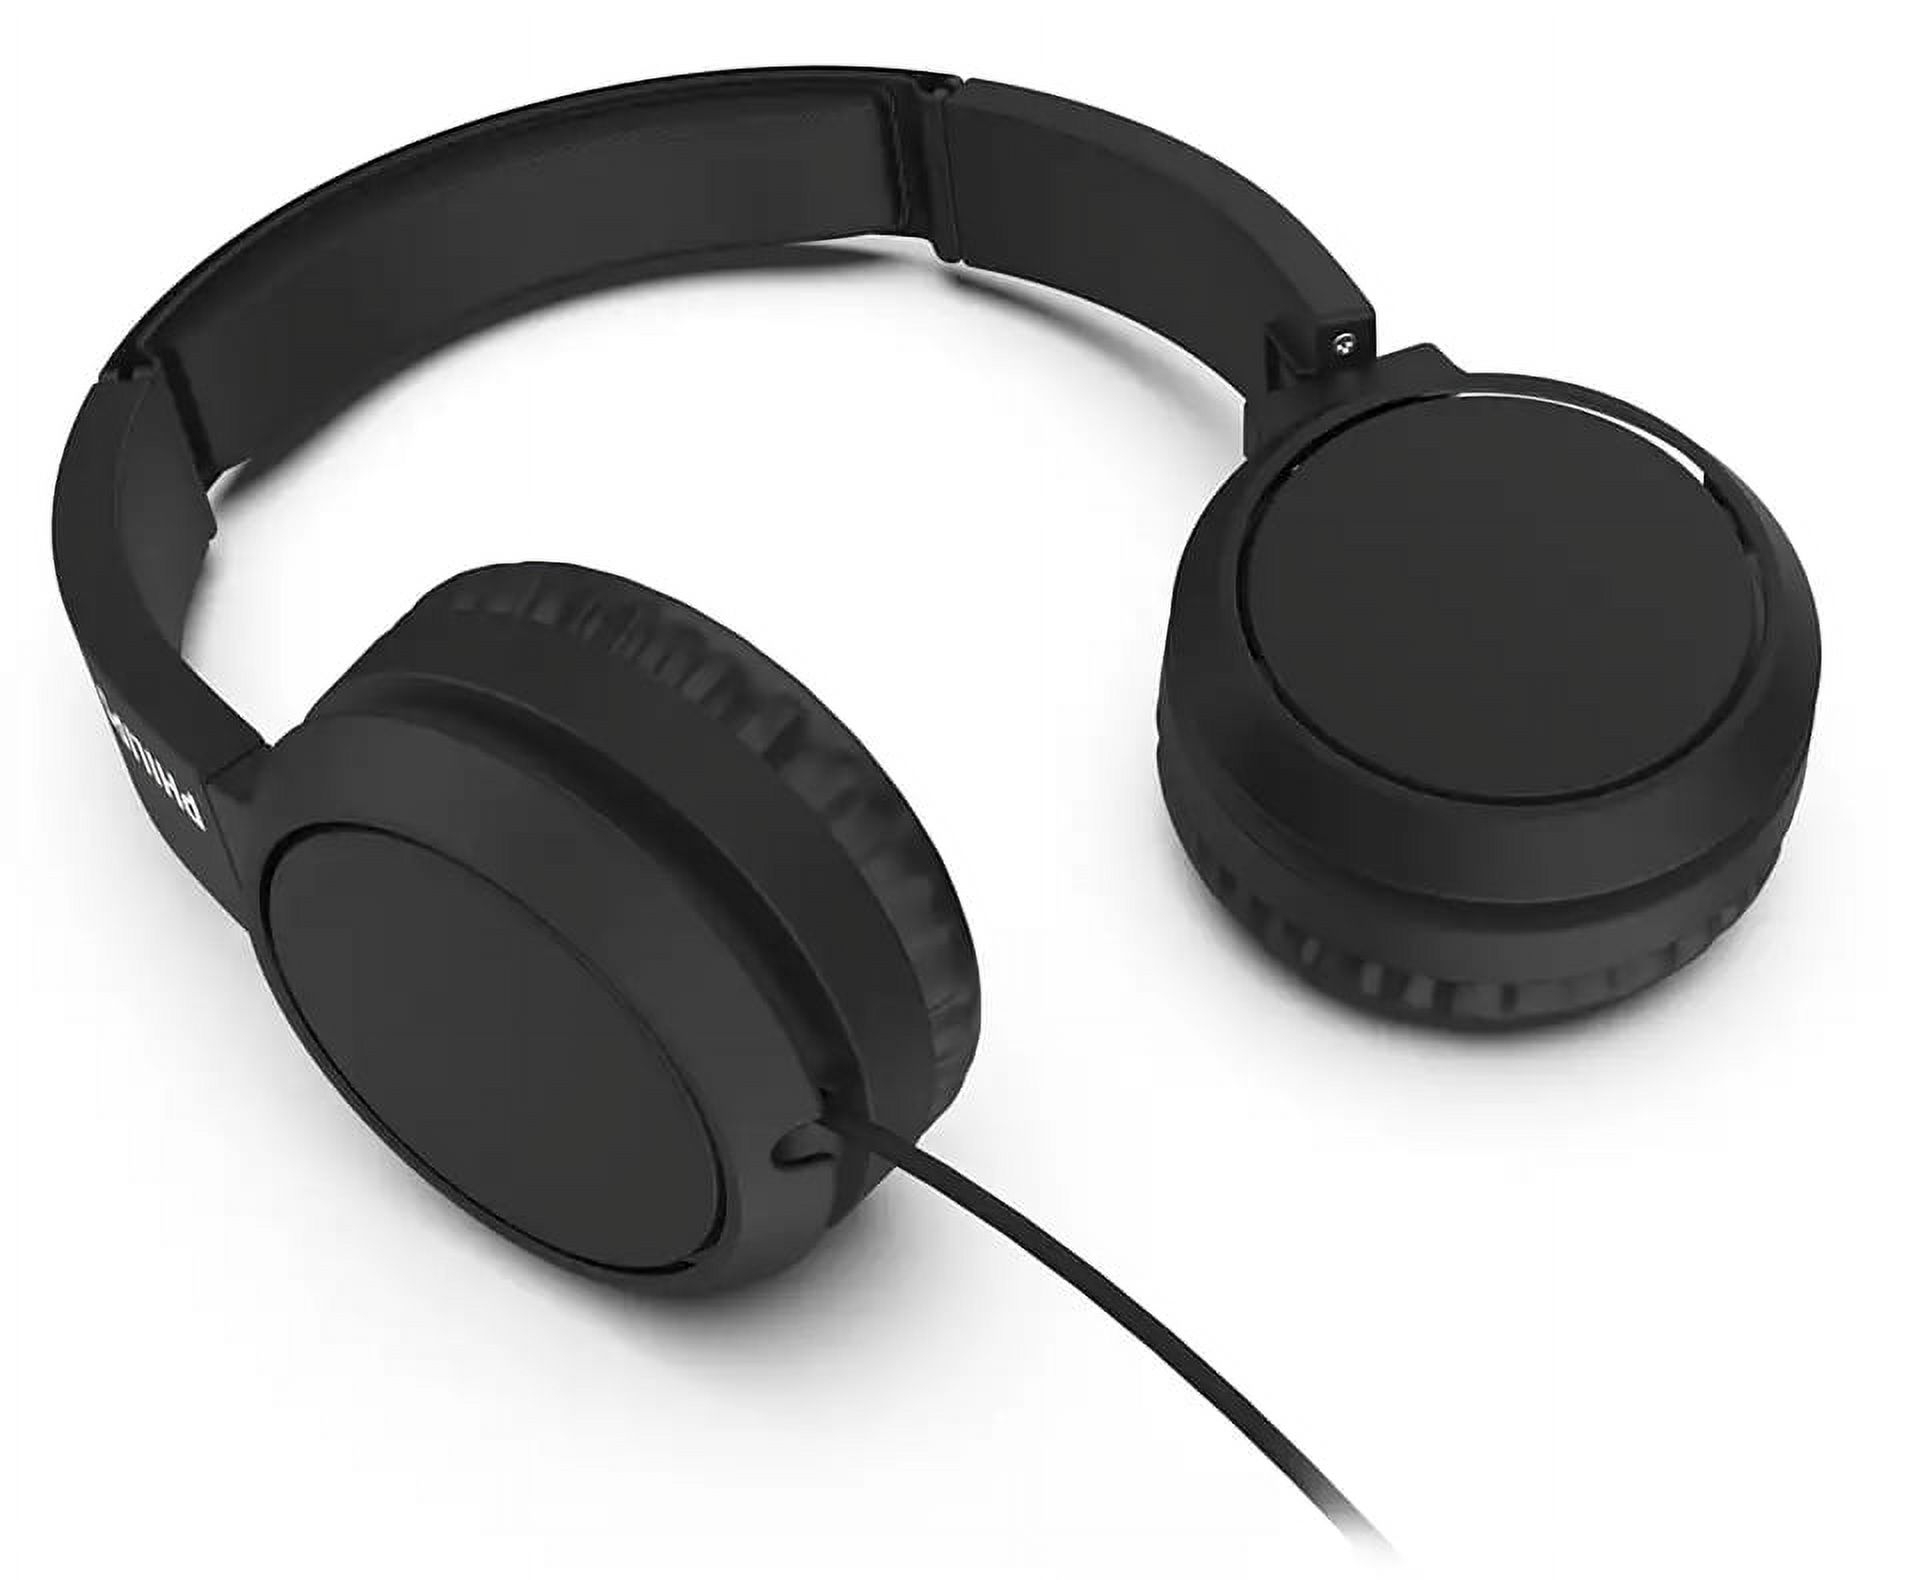 Philips Audio On-Ear Headphones TAH4105BK/00 with Microphone (In-Line Remote Control, Flat Folding, Angled Jack, Padded Headband, Noise Isolating) Black – 2020/2021 Model - image 5 of 5